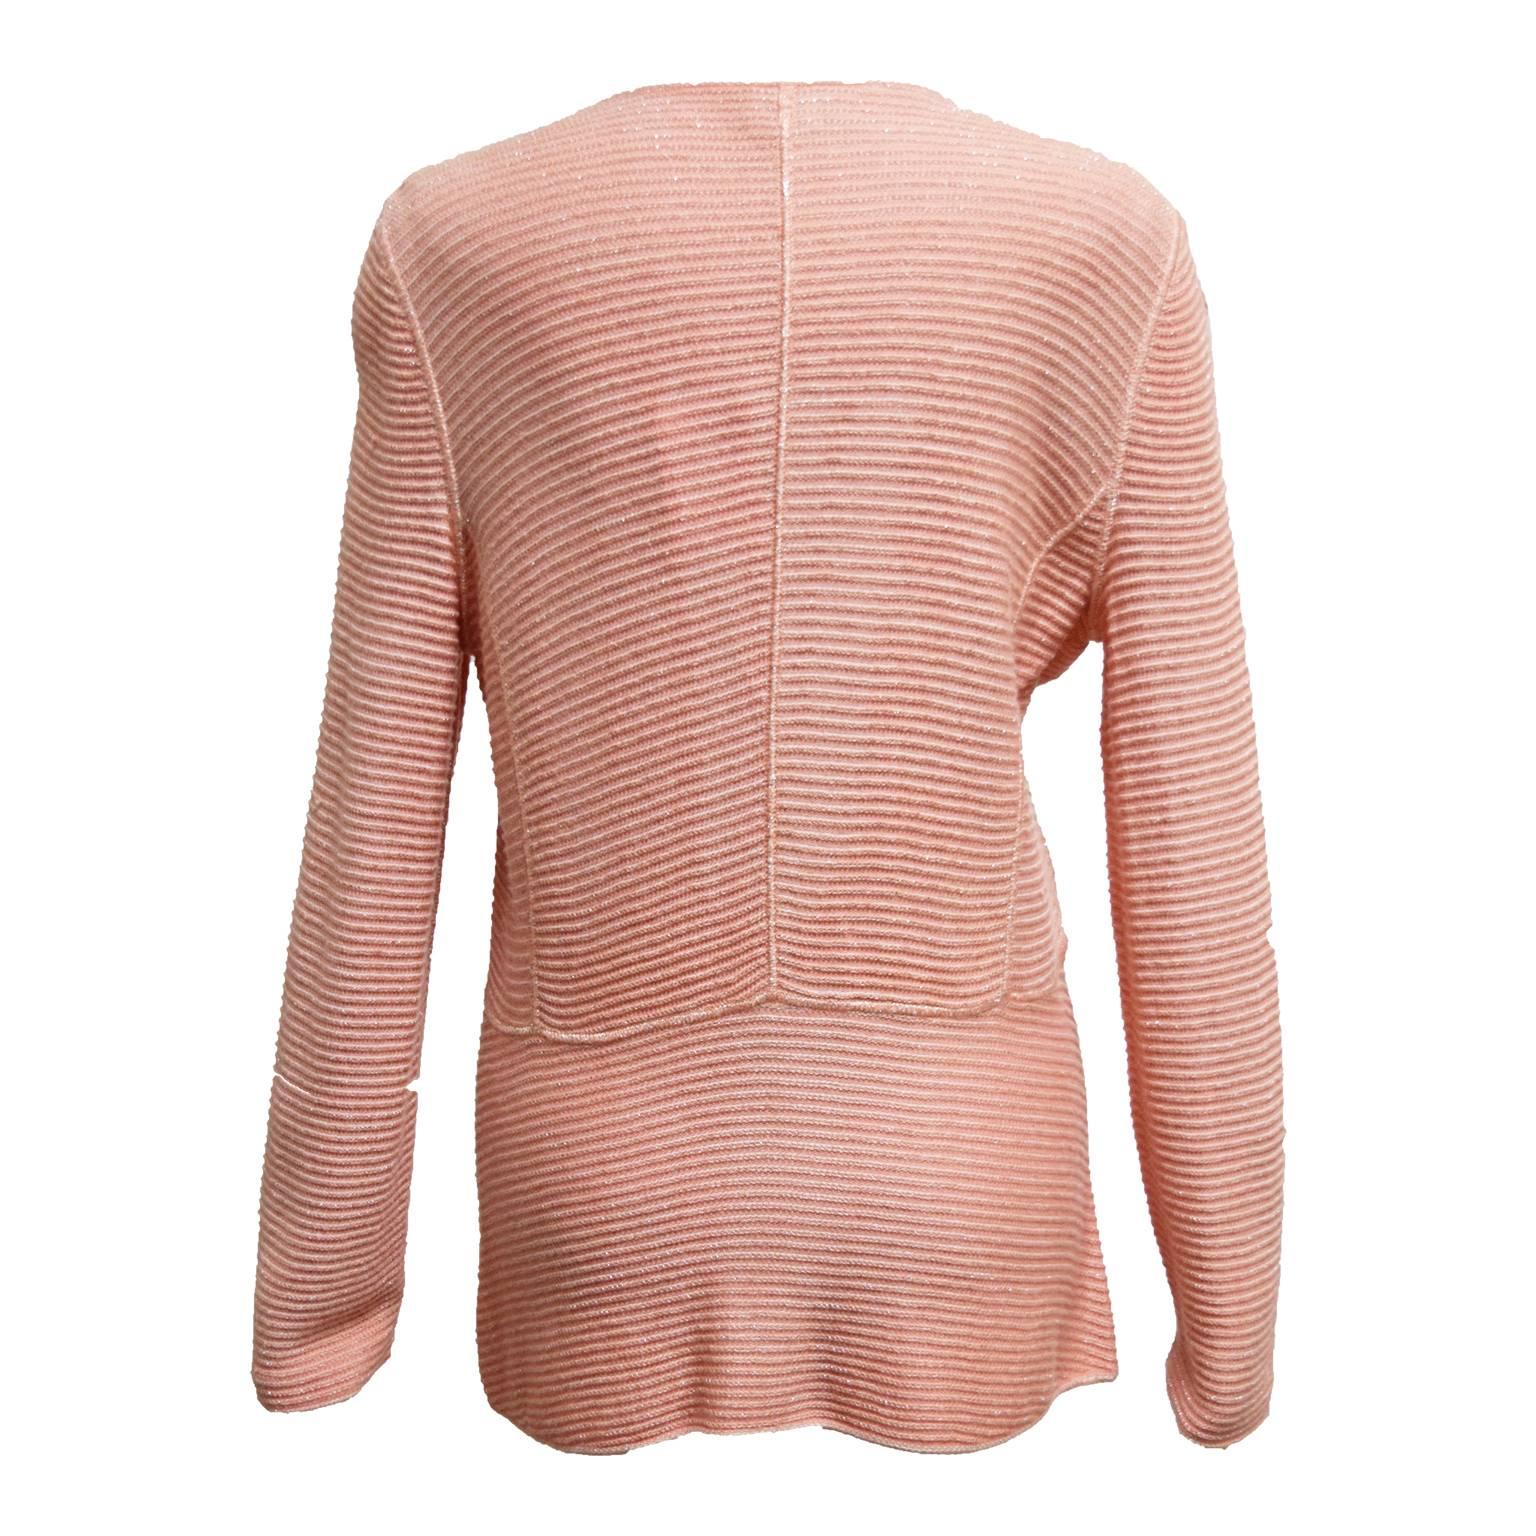 This great piece by Armani is a salmon pink wool blend and is long sleeved. There are ribbed detailing along the bodice and the sleeves and has a button closure. 